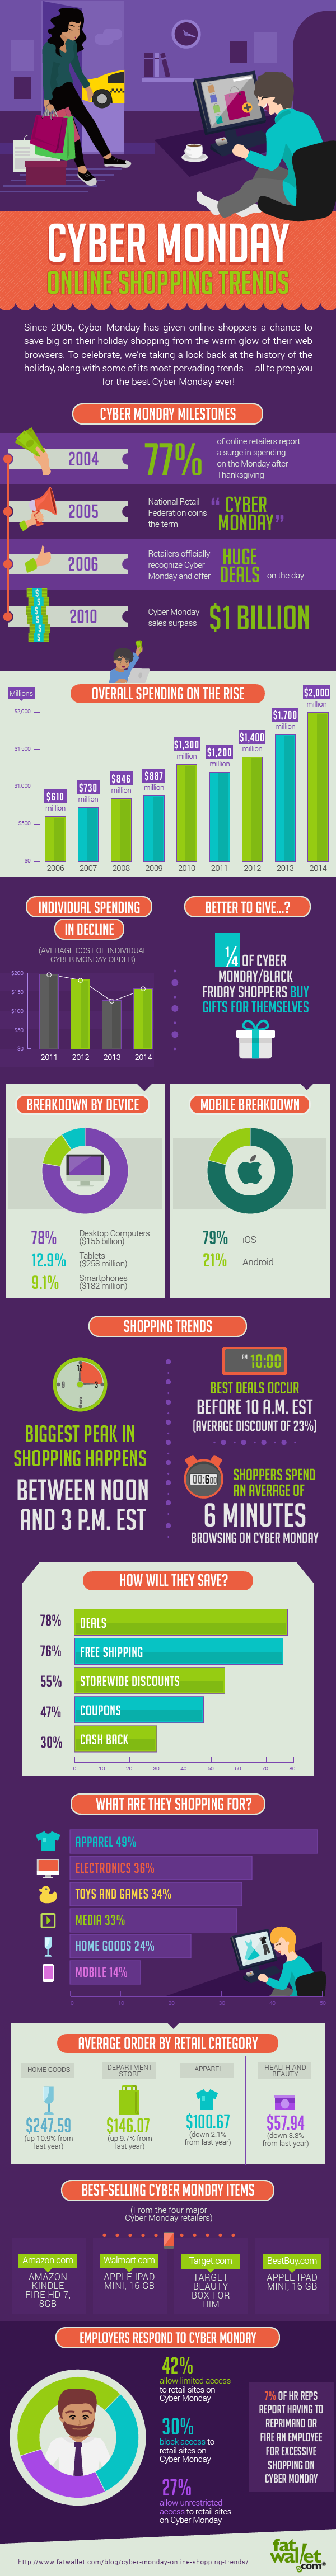 Cyber Monday Online Shopping Trends